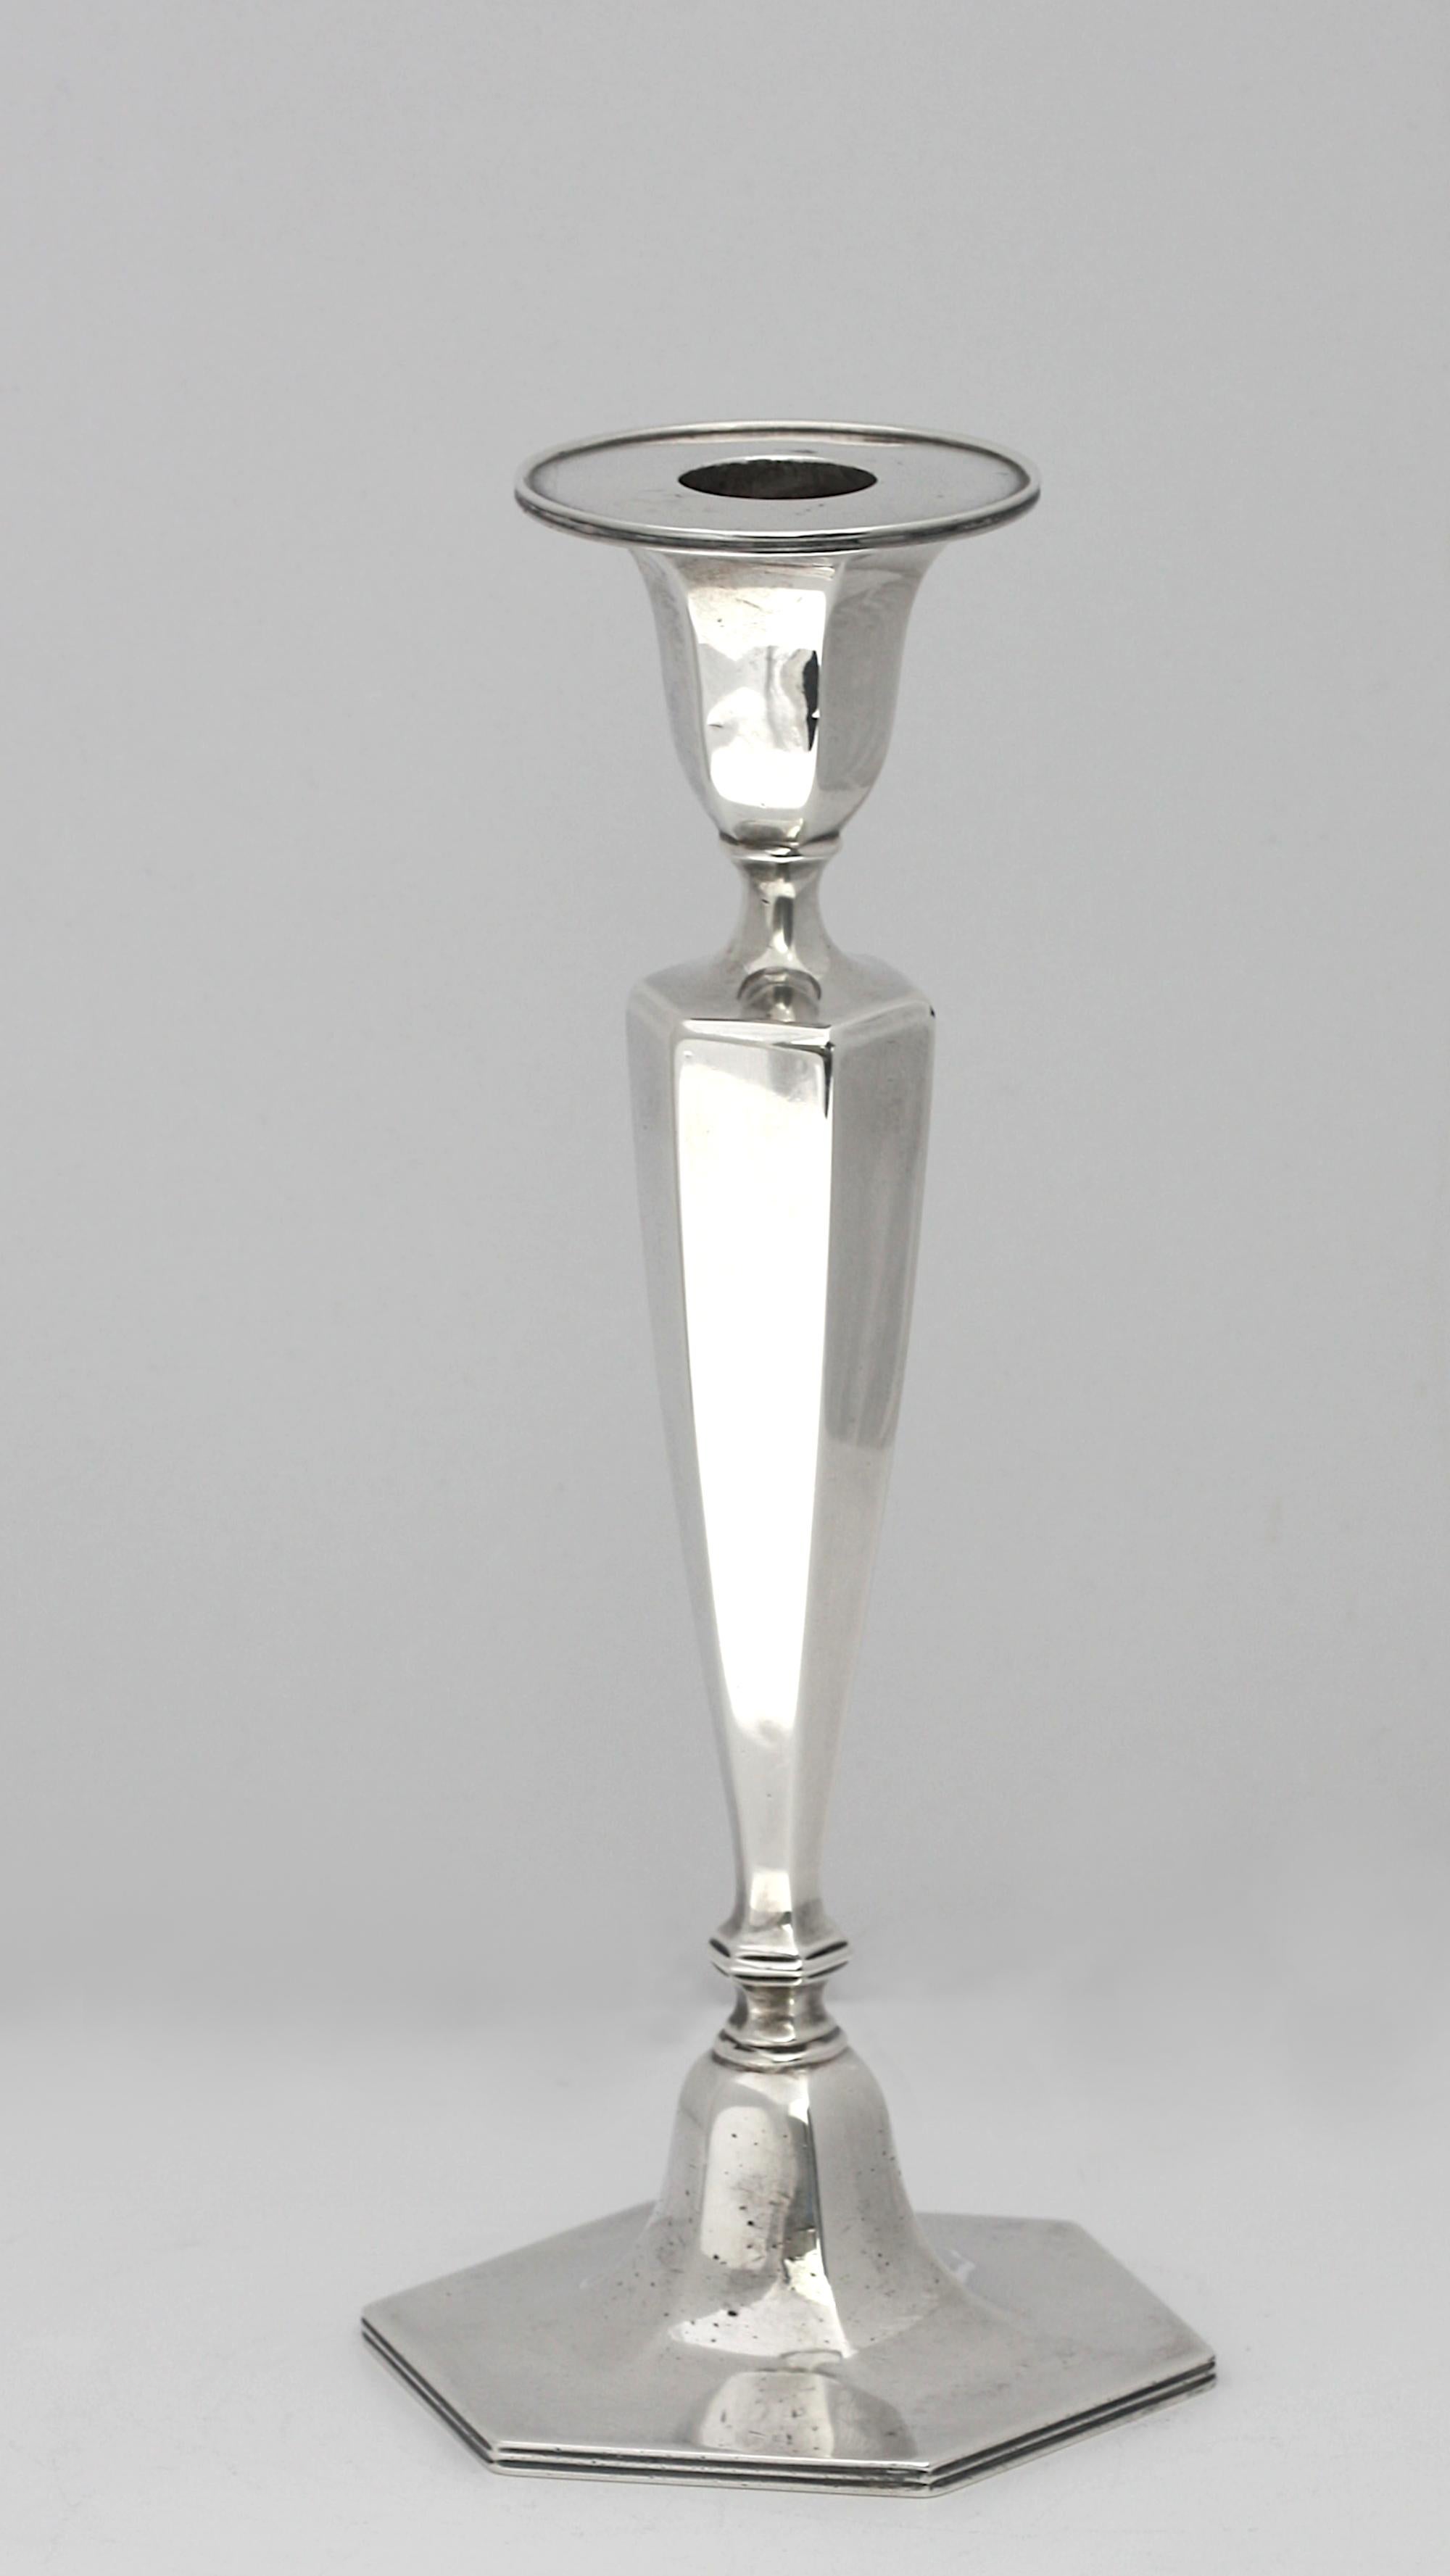 American Sterling Silver Candlestick 
1907-1938, Tiffany & Co. Of classical tapering hexagonal form, cement-filled base.
Height 9 in. (22.86 cm.) Weighing approximately 14.2 oz t.